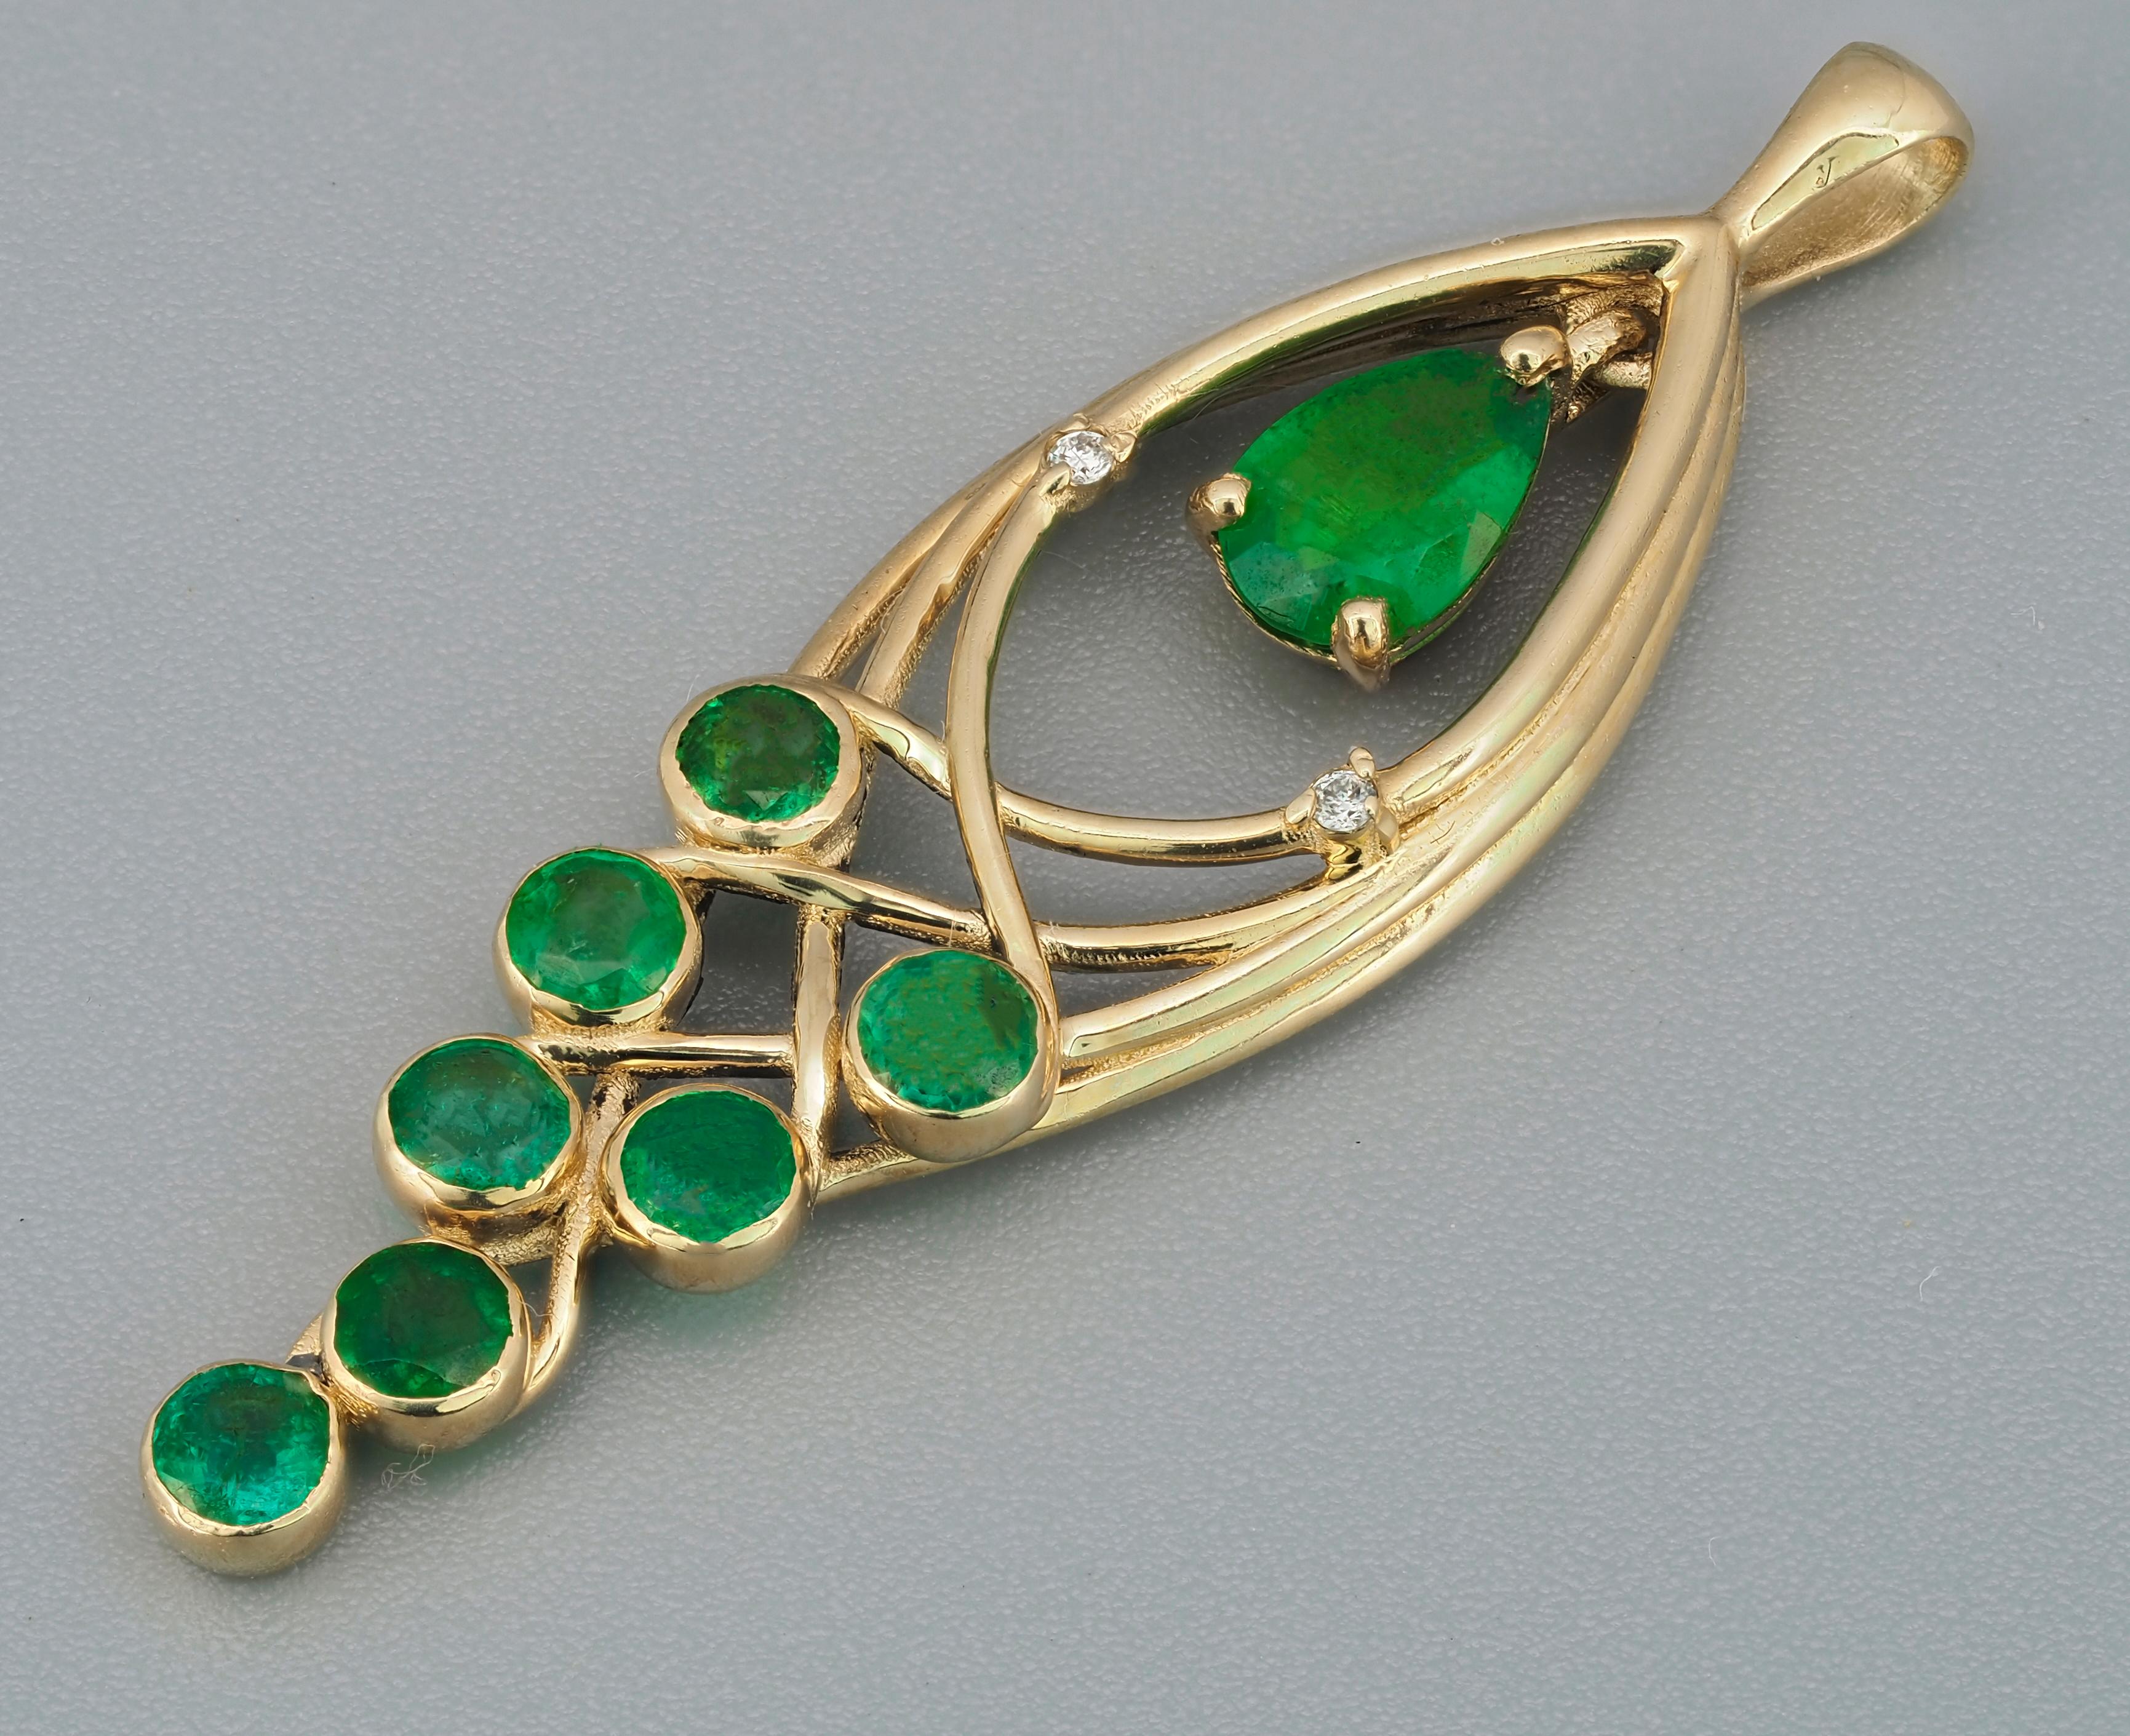 Women's 14k Gold Pendant with Emerald, Emeralds and Diamonds, Leaf Pendant For Sale